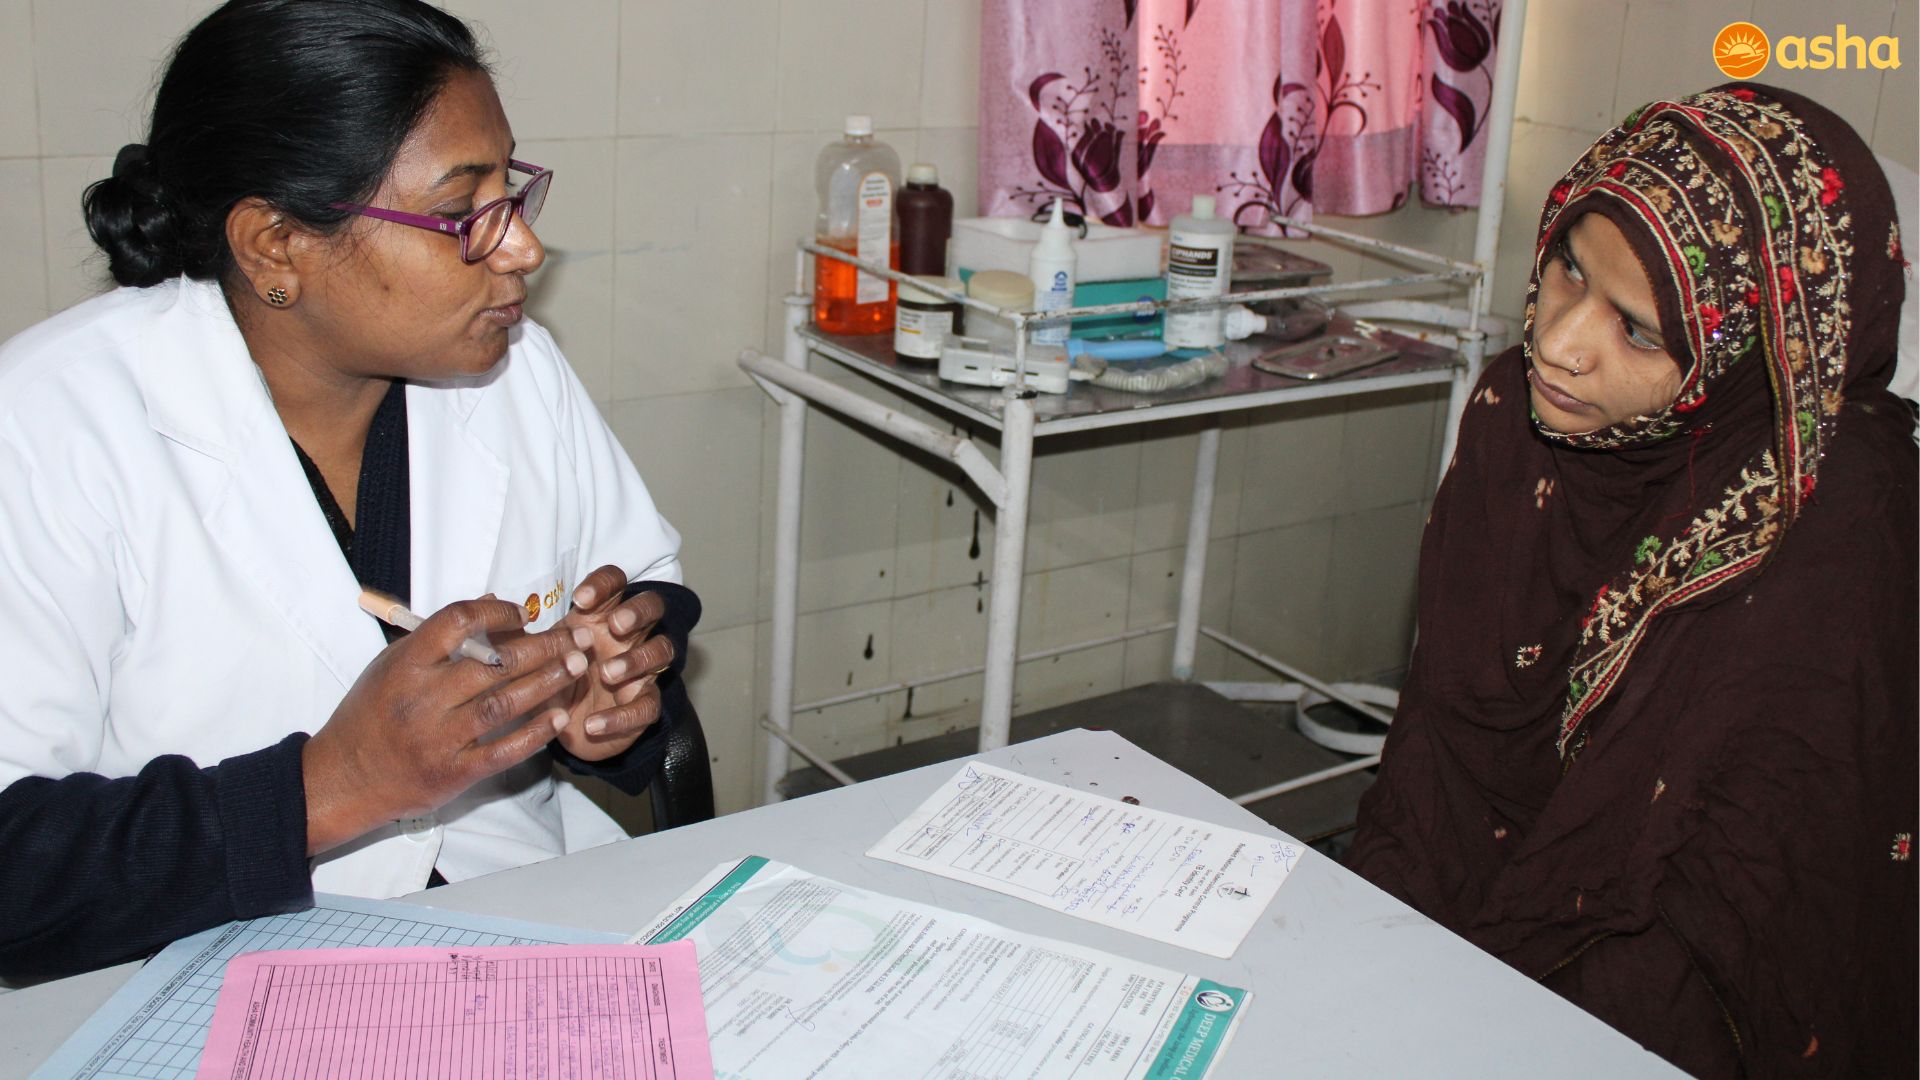 Asha ensures treatment and support to Farah, a Tuberculosis patient during her pregnancy